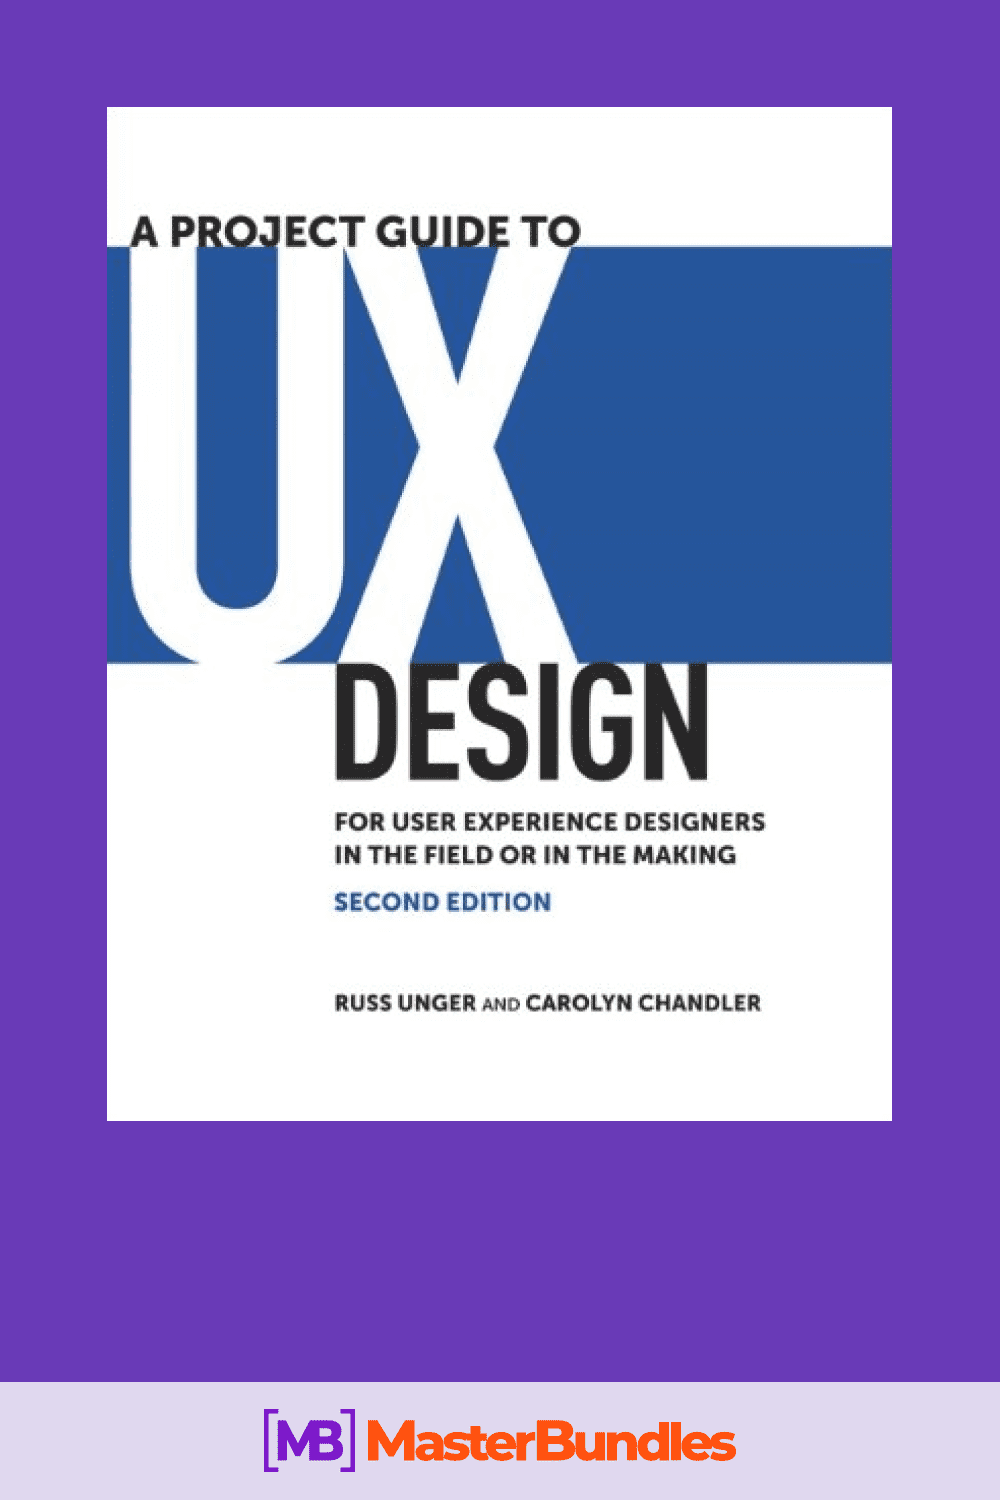 Photo of the book A Project Guide to UX Design: for user experience designers in the field or in the making.